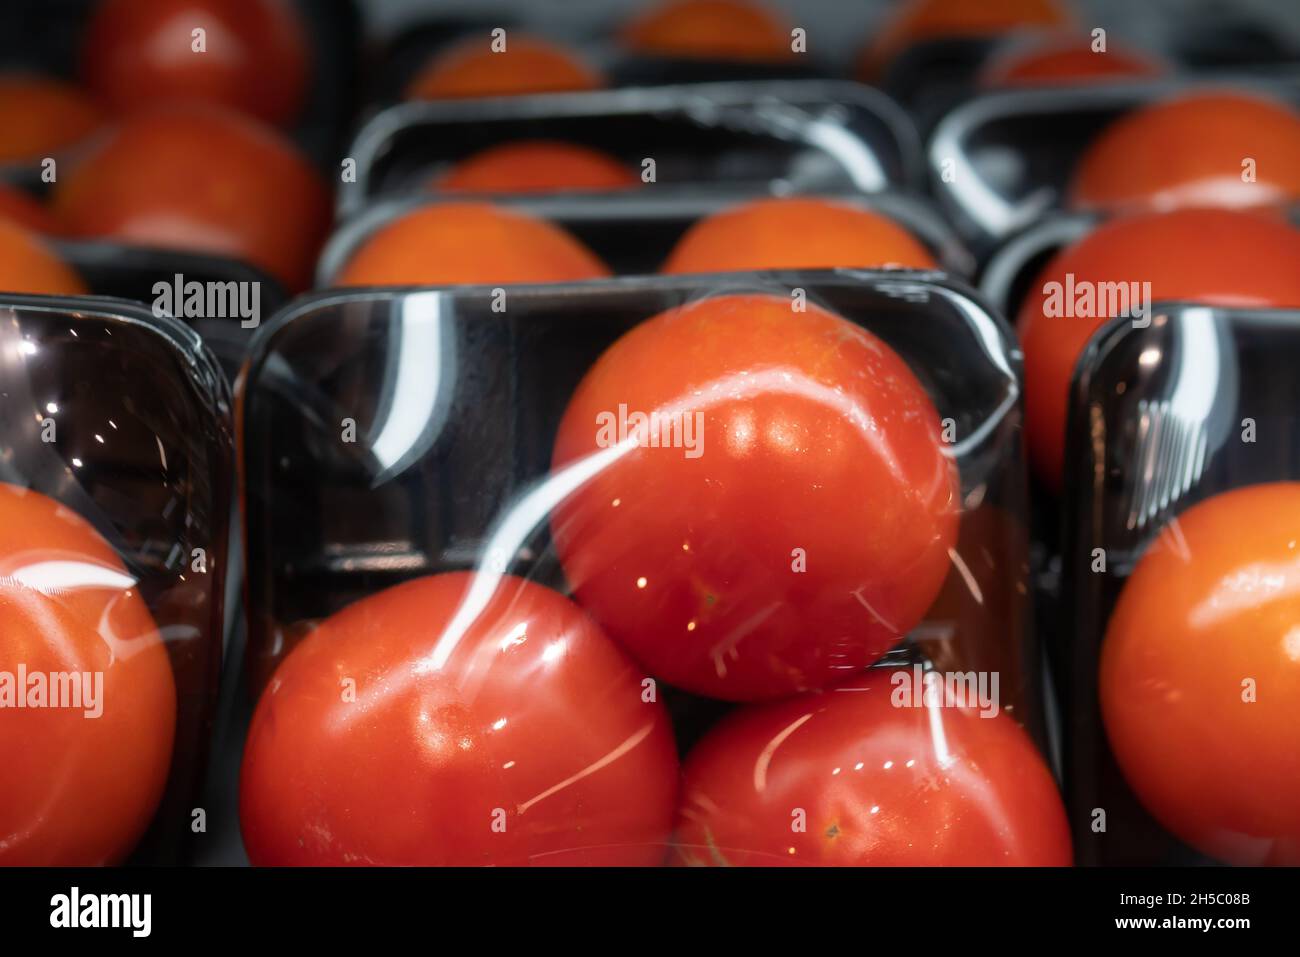 Tomatoes in plastic tray and plastic wrap packaging Stock Photo